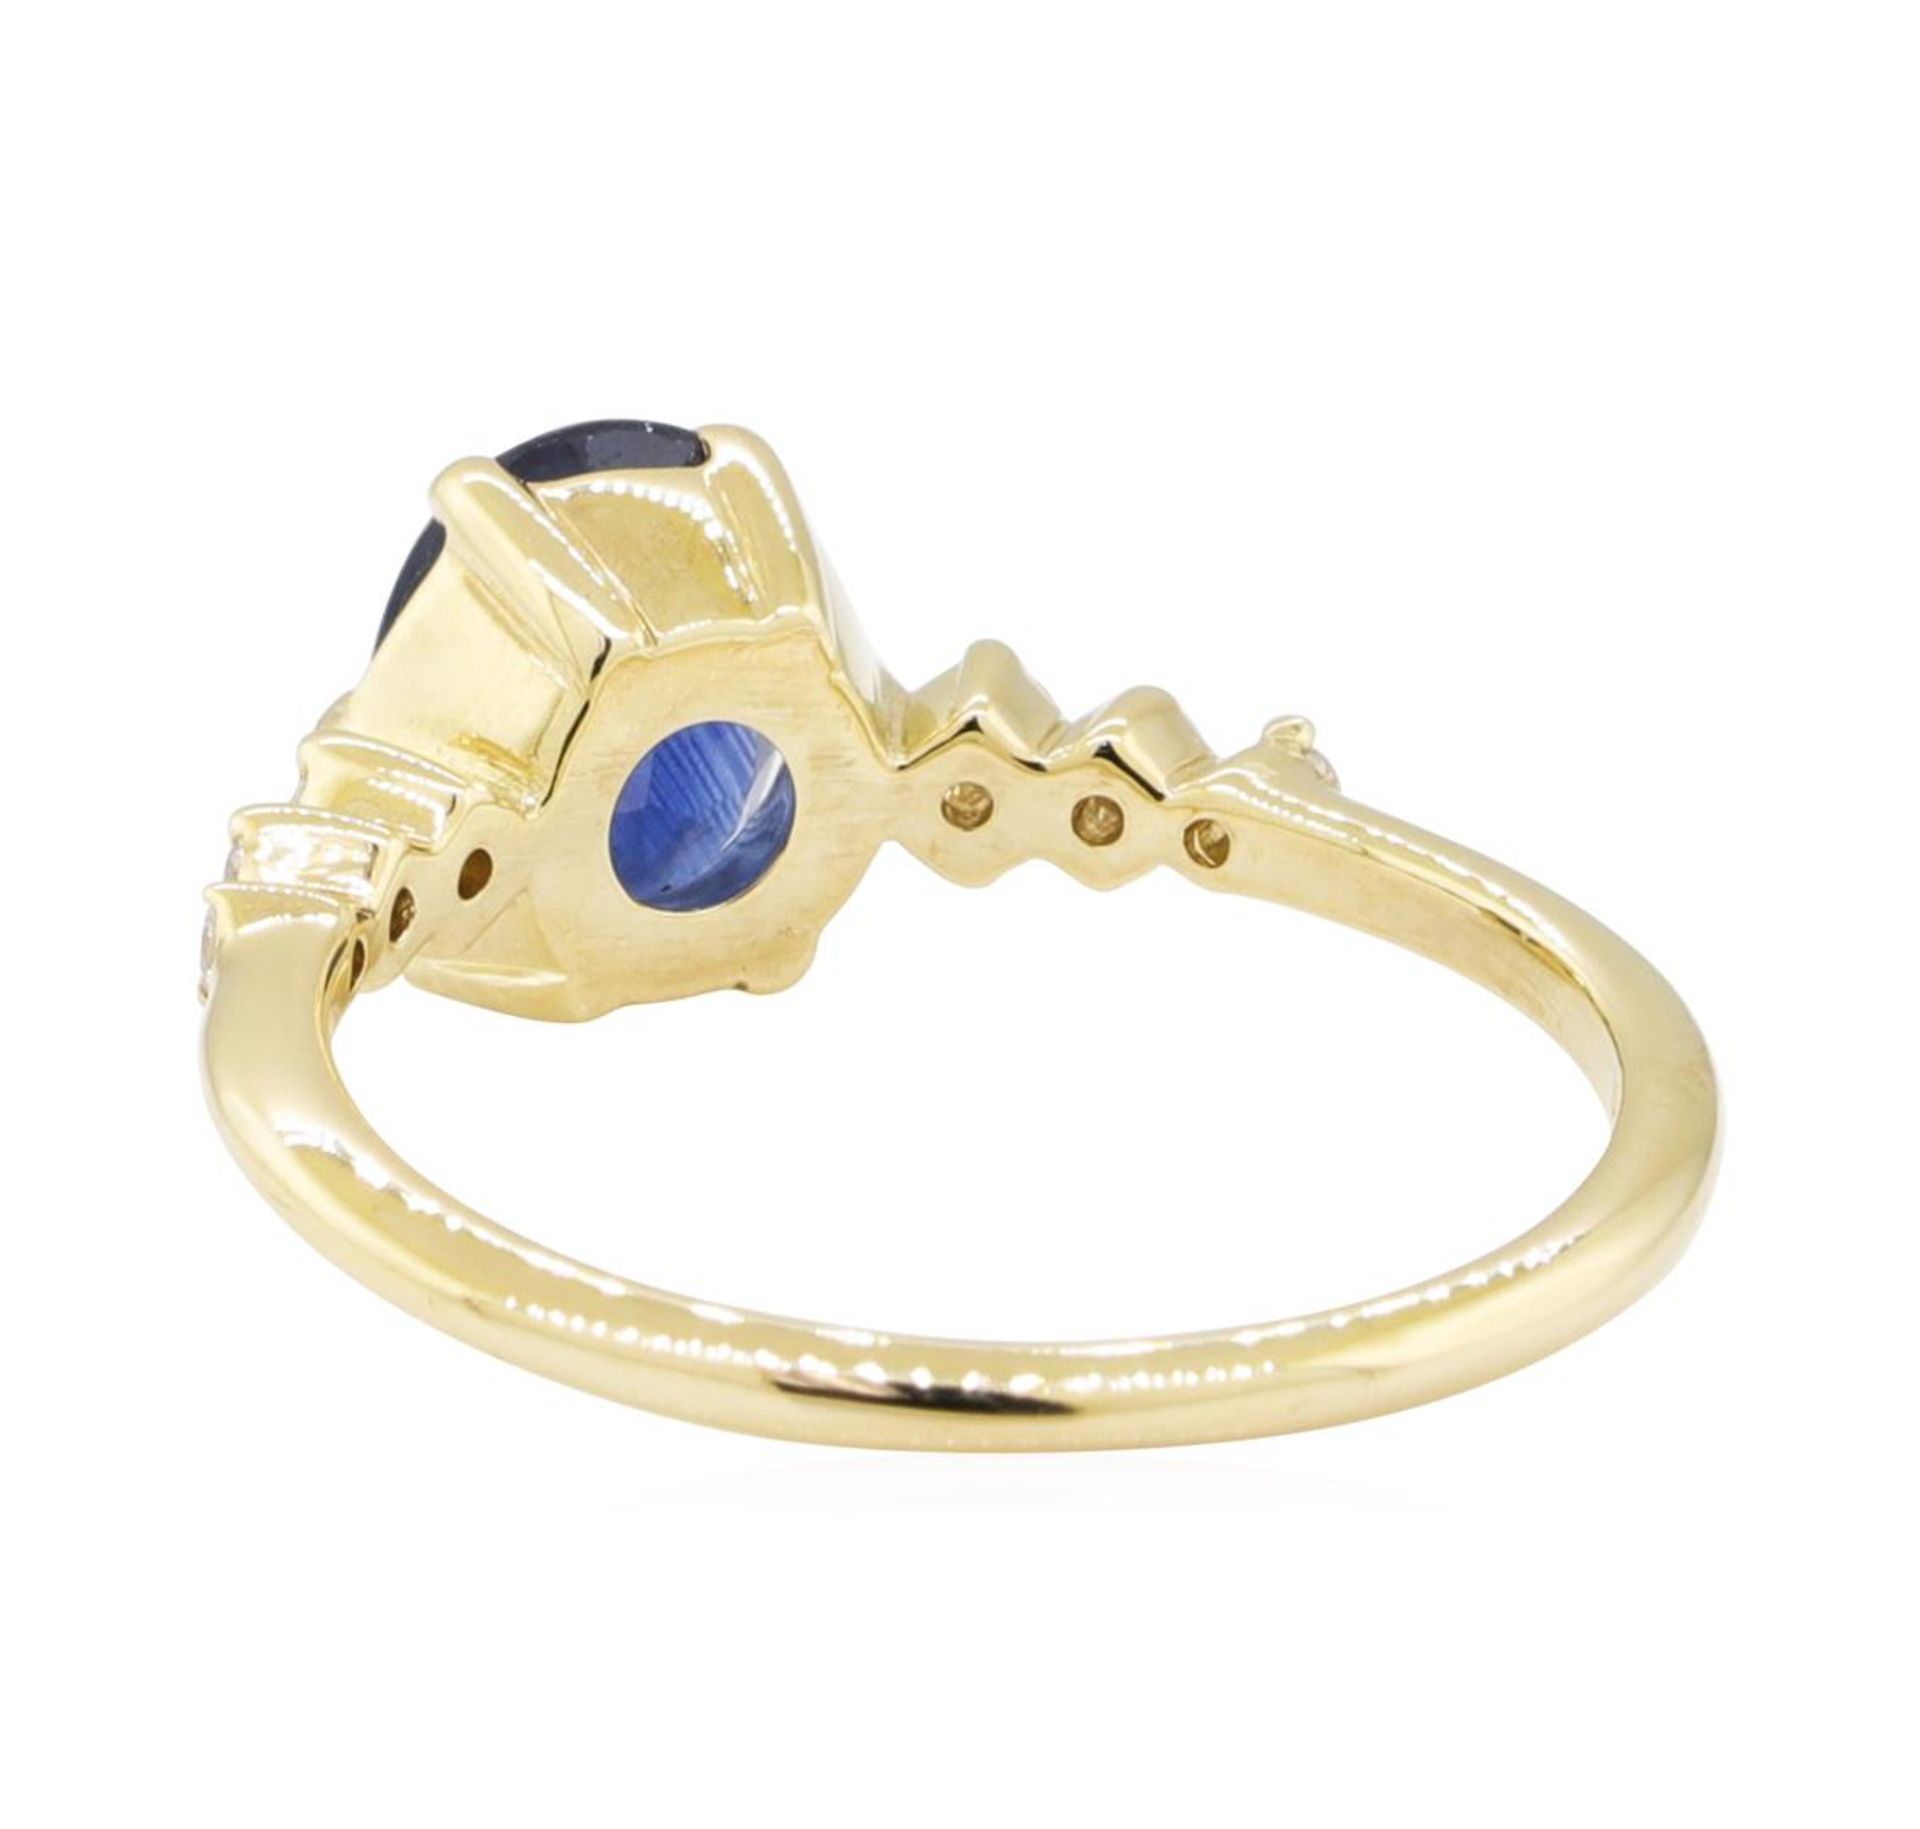 1.43ctw Sapphire and Diamond Ring - 14KT Yellow Gold - Image 3 of 4